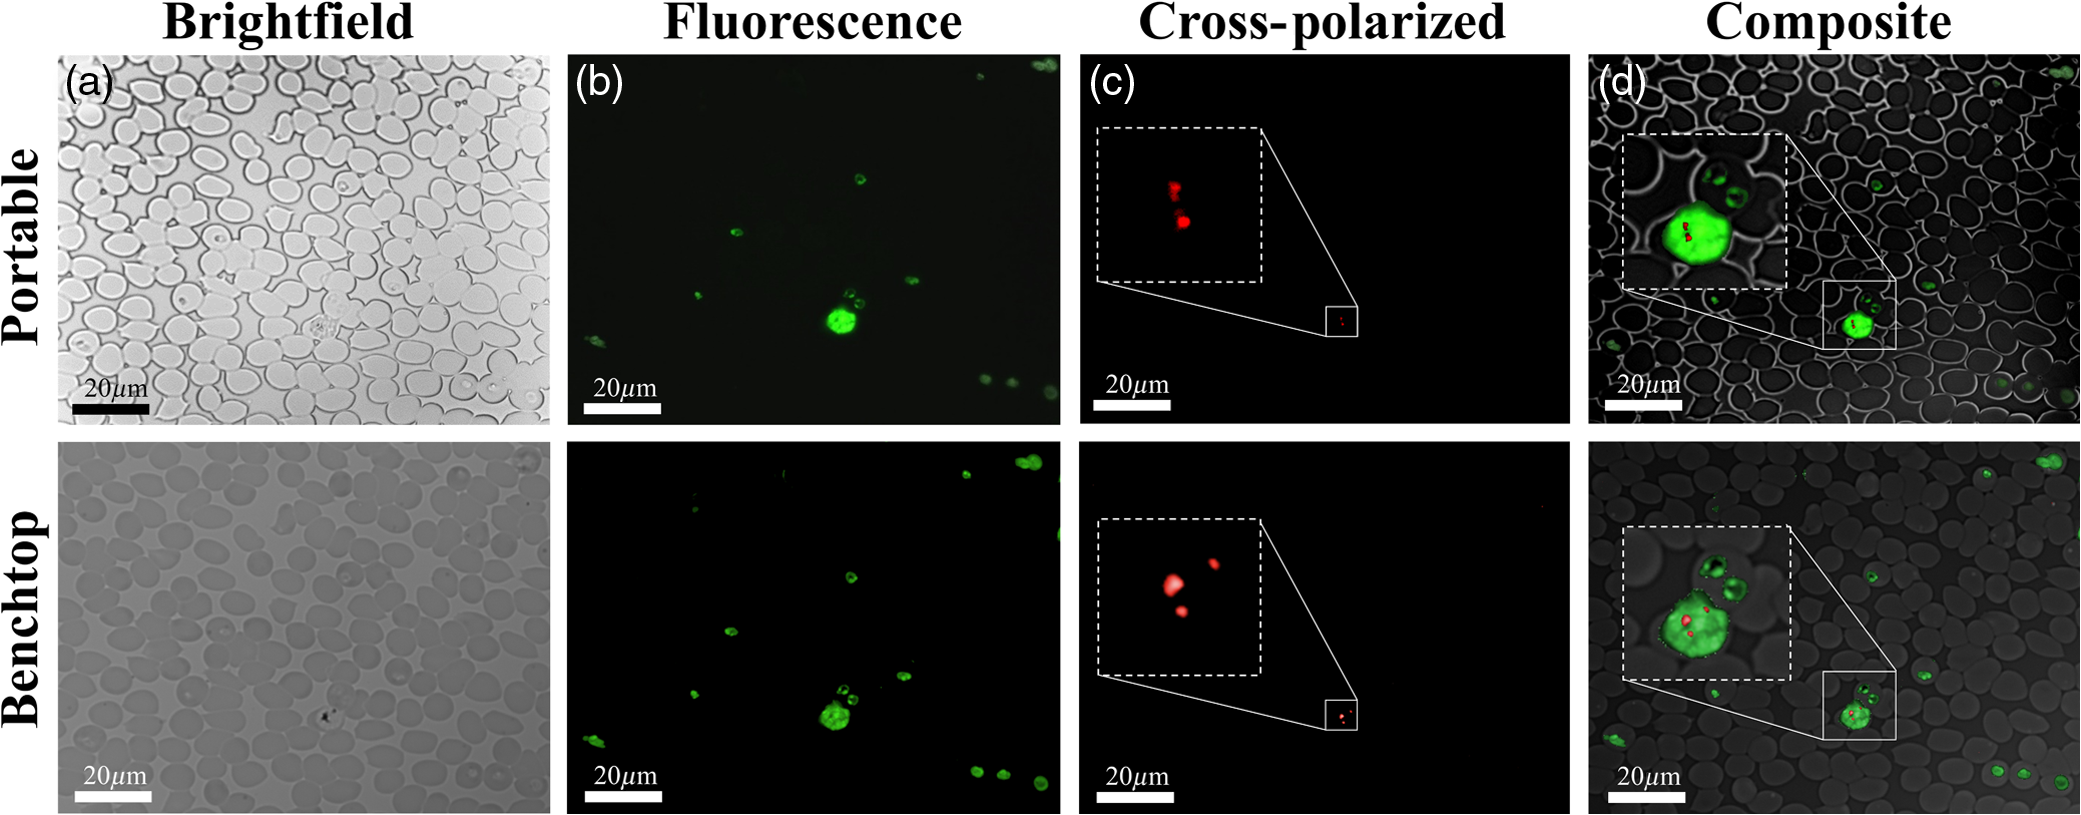 mac software for viewing fluorescence data